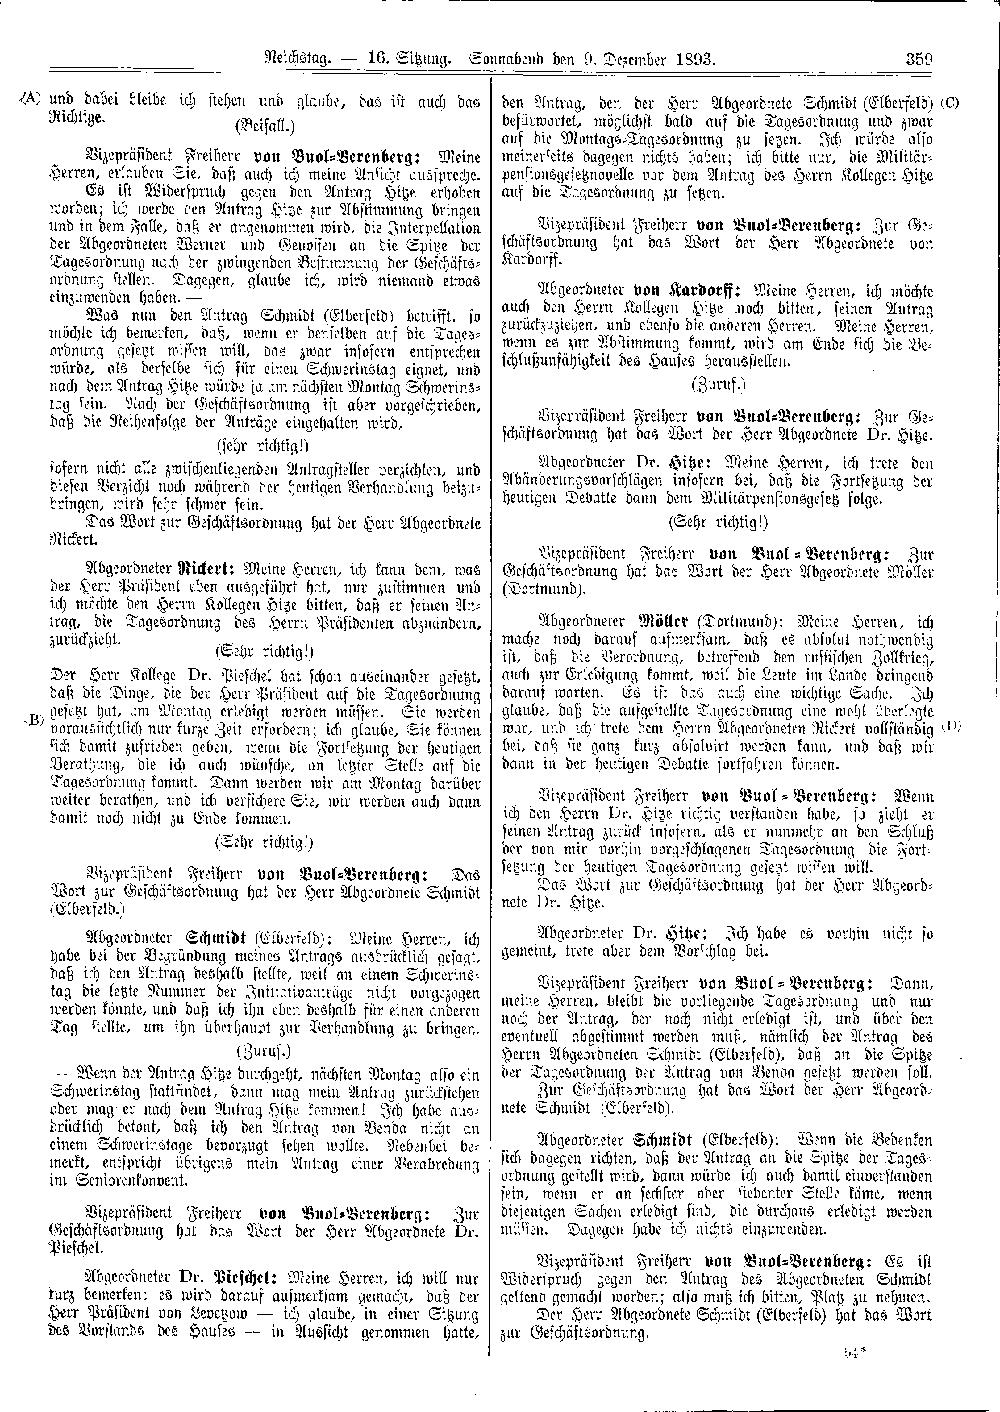 Scan of page 359